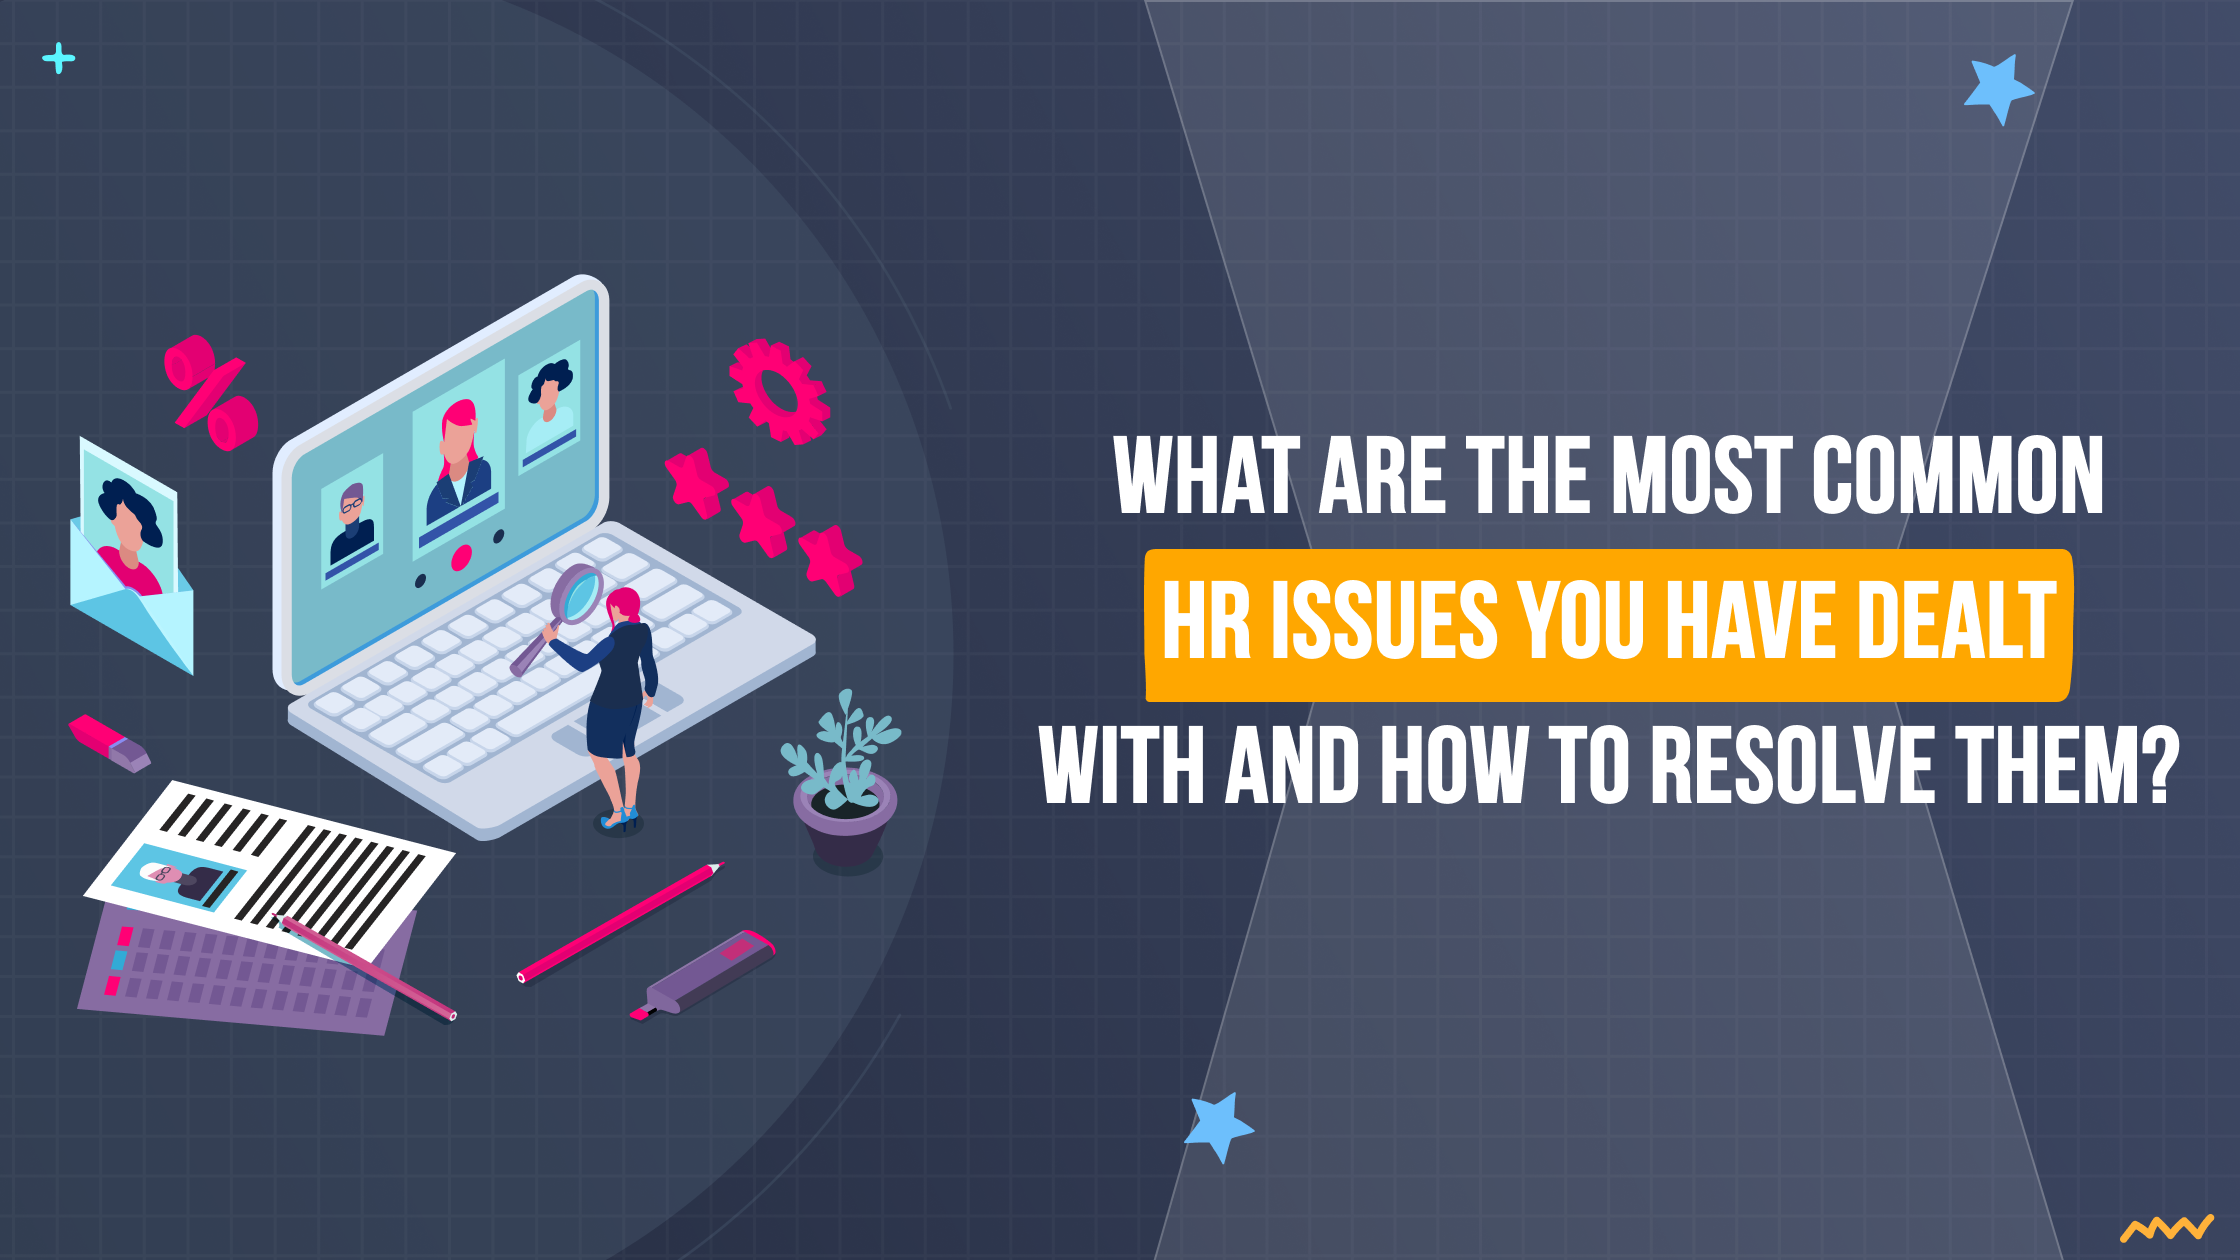 What Are The Most Common HR Issues You Have Dealt With And How To Resolve Them